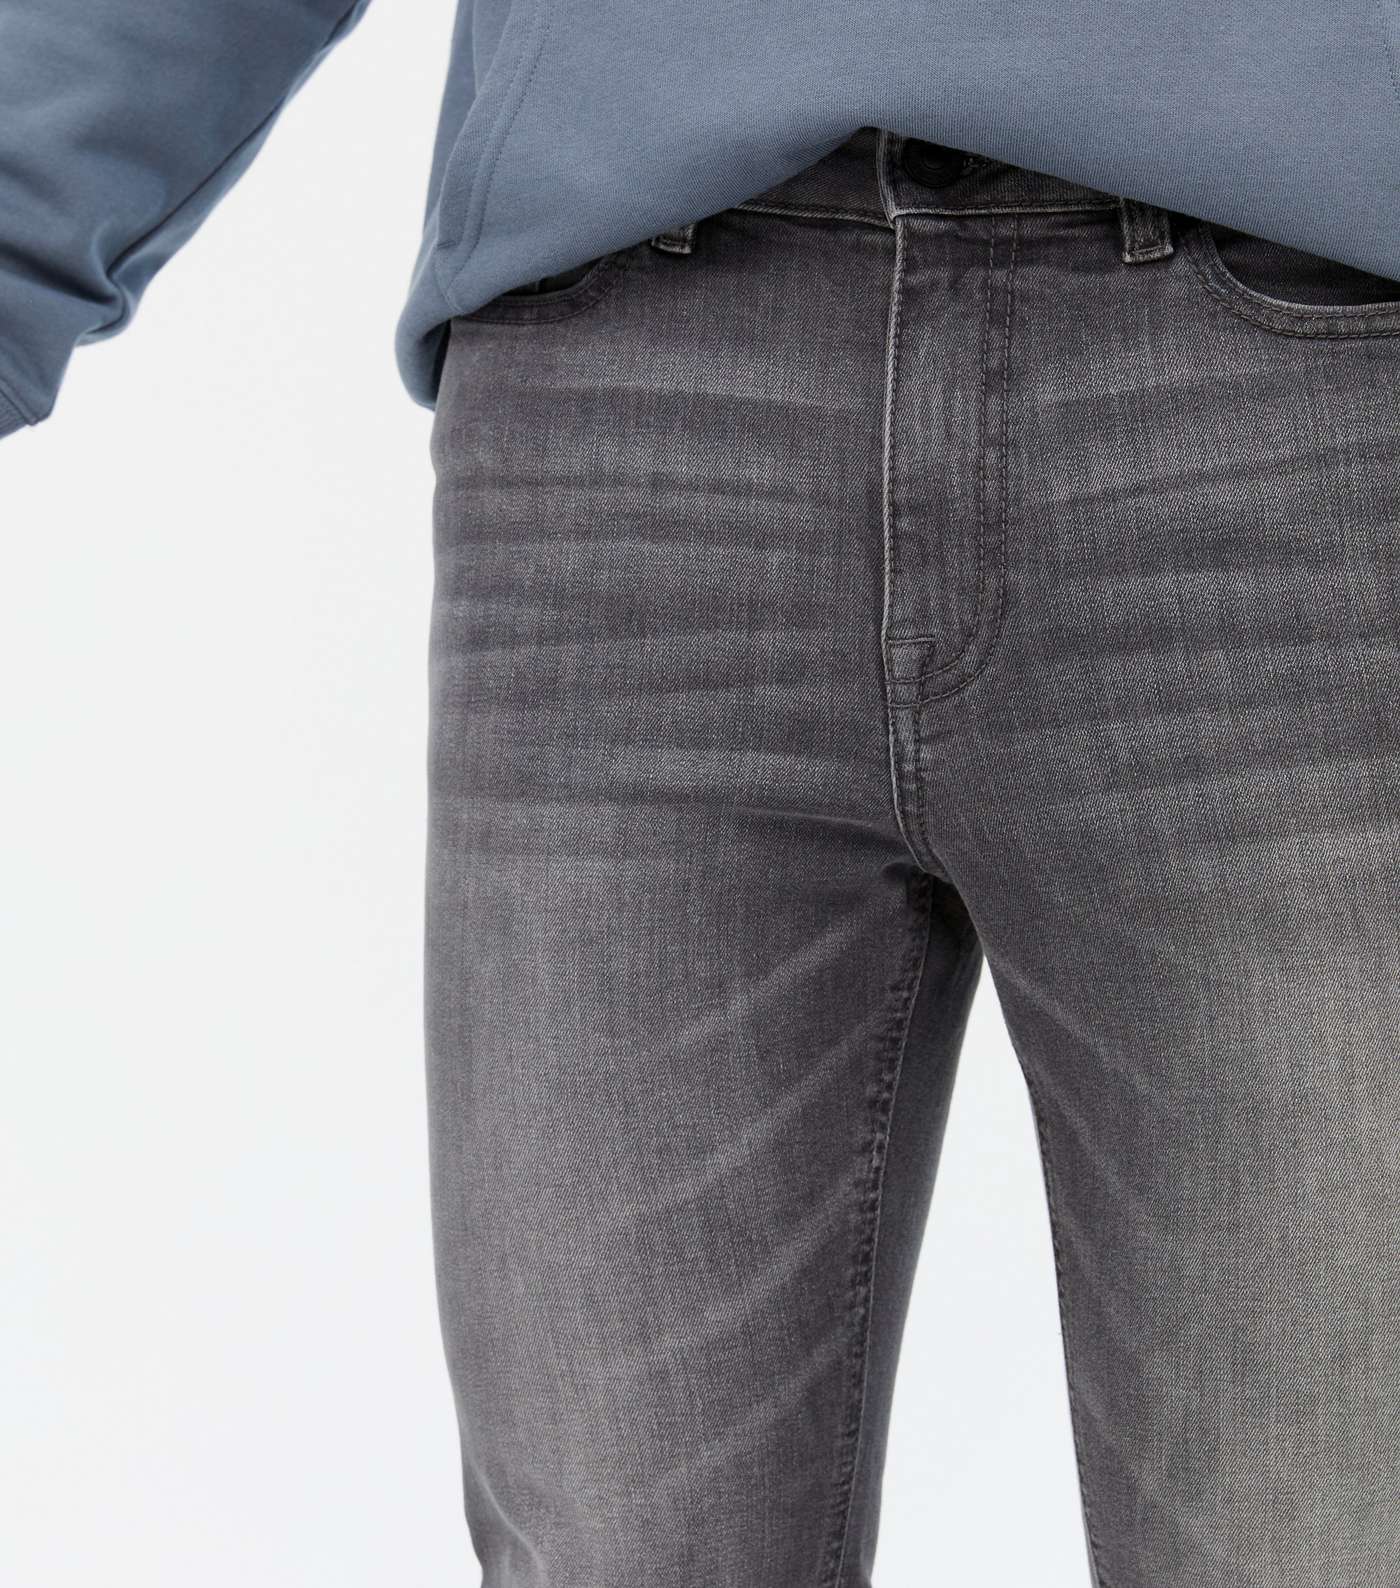 Pale Grey Washed Slim Stretch Jeans Image 3